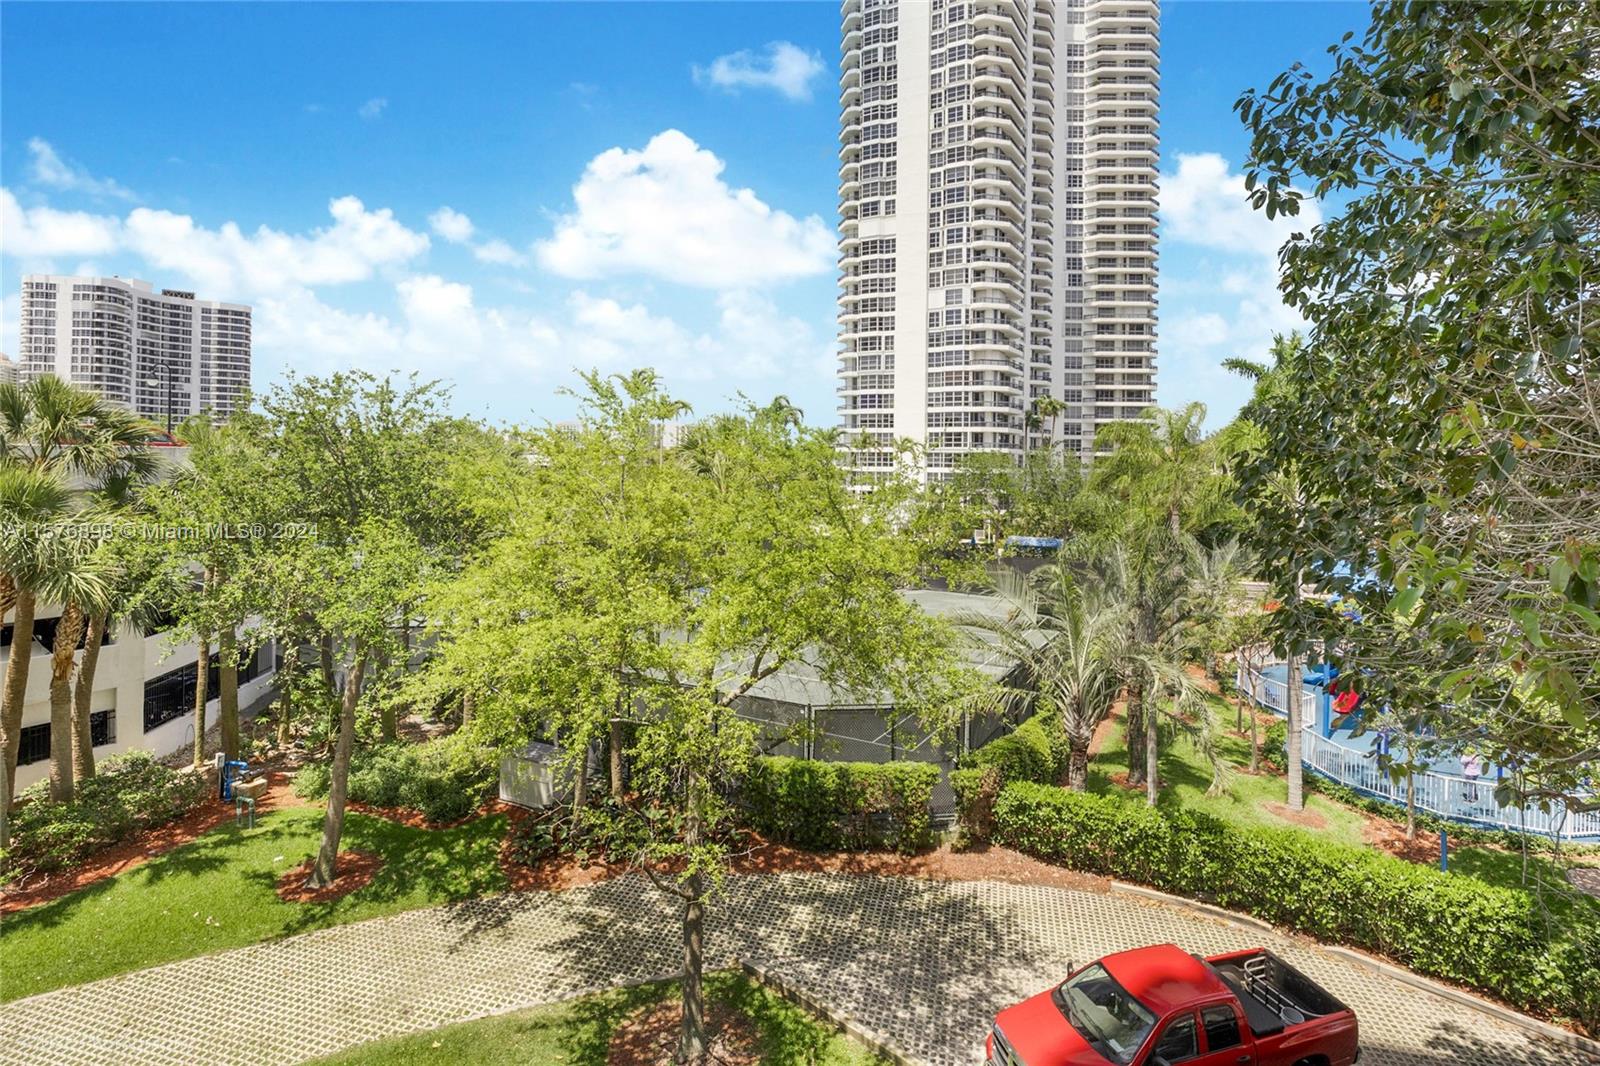 Completely Renovated Condo on a low floor! Everything has been redone. In the heart of Aventura close to EVERYTHING!! Furniture is optional. Owner is motivated! Very easy to show!